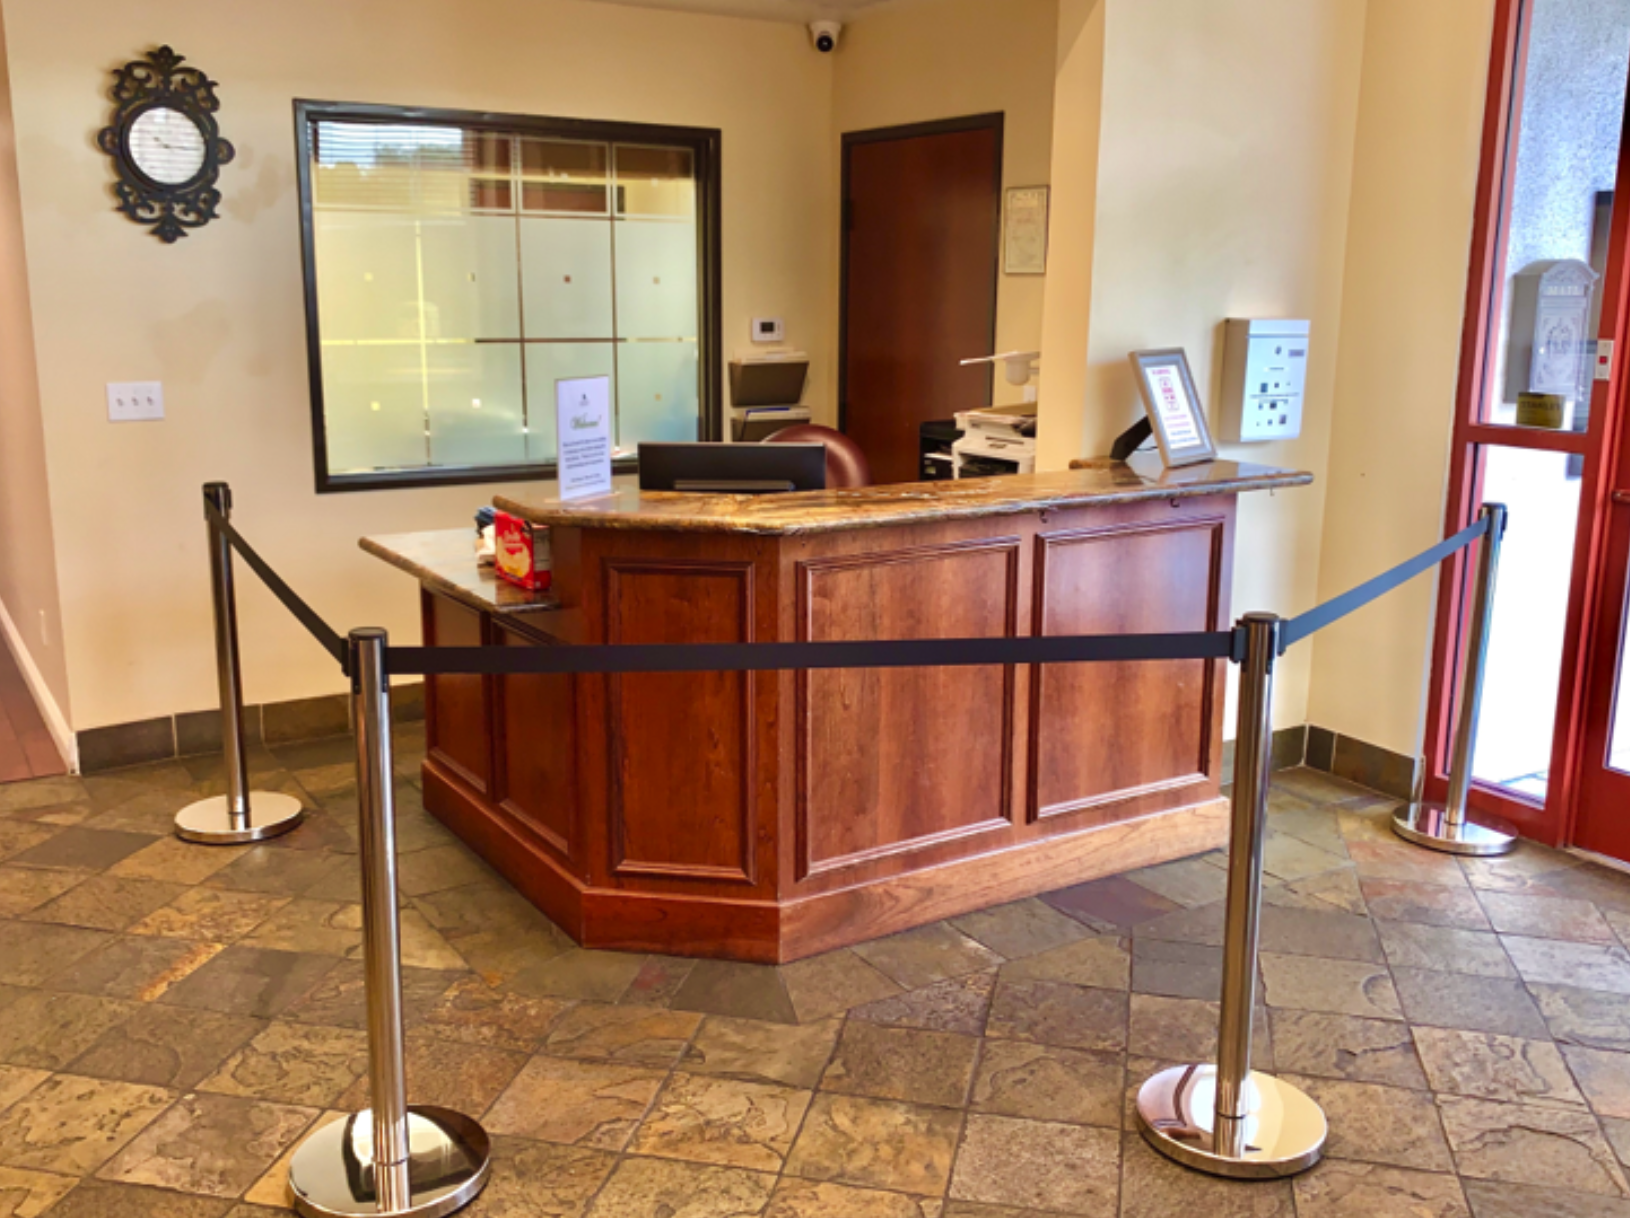 Roped off Receptionist area at Lakeside Business Suites